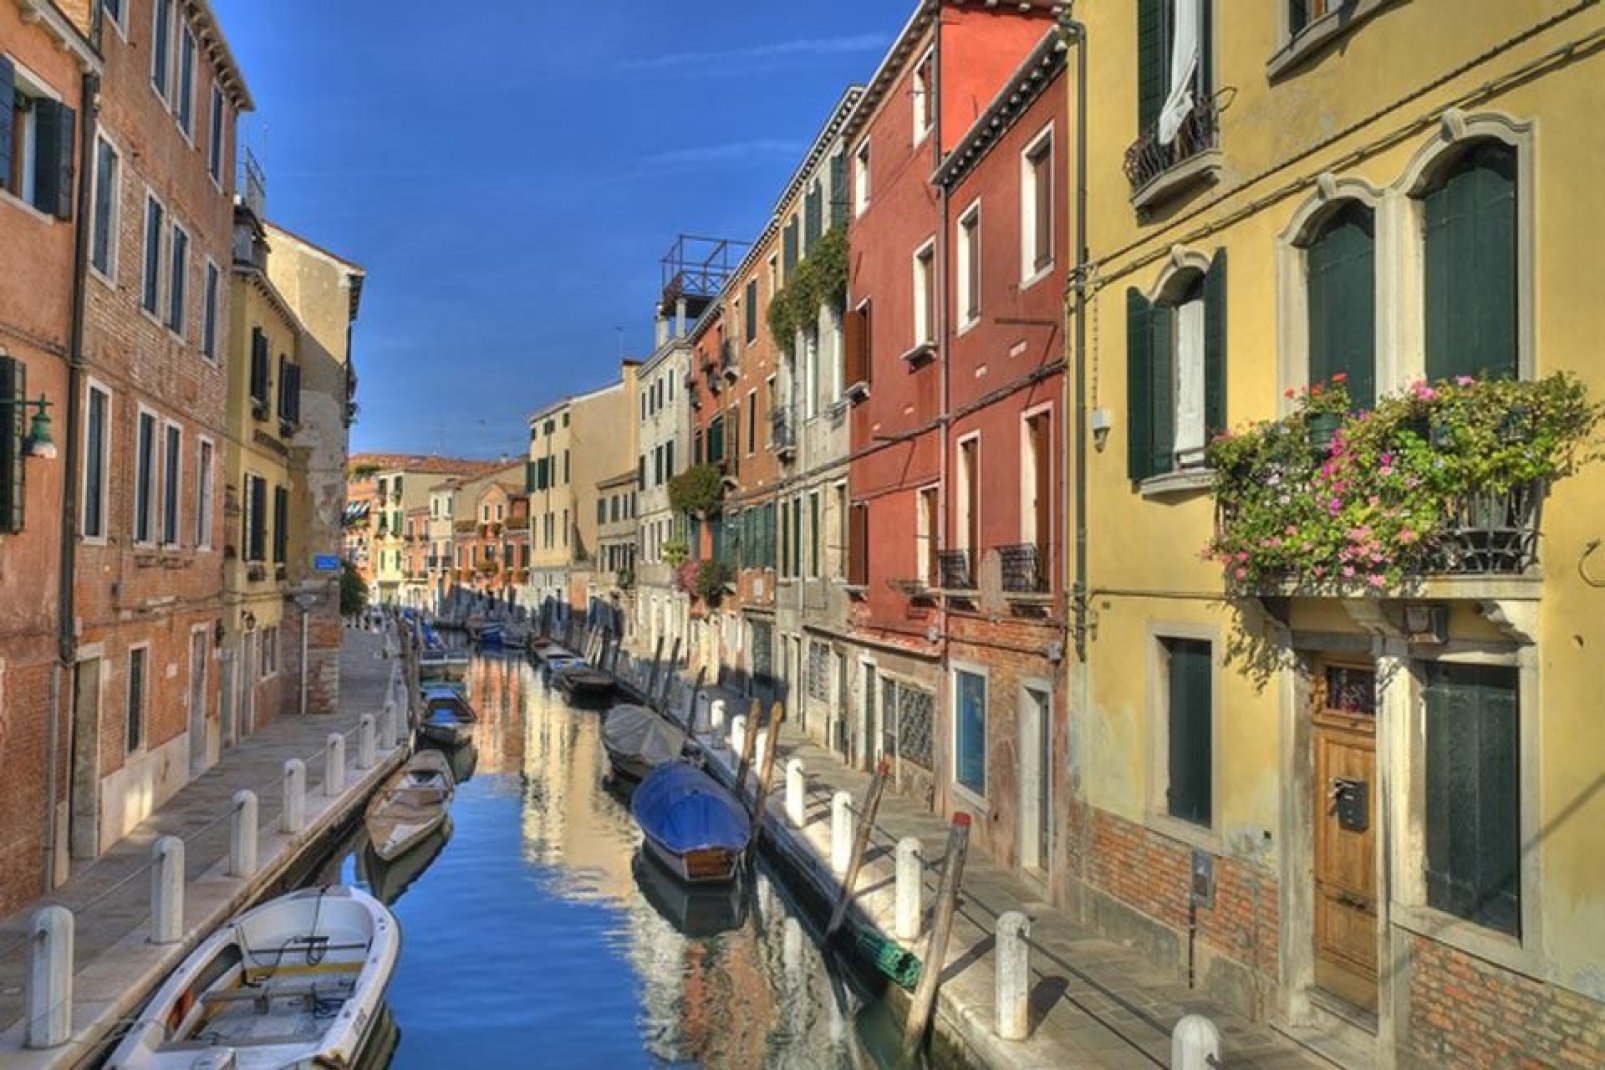 The centre of Venice stretches over 118 islets linked by 354 bridges and divided by 177 canals, which have always served as channels of communication for the city's inhabitants.